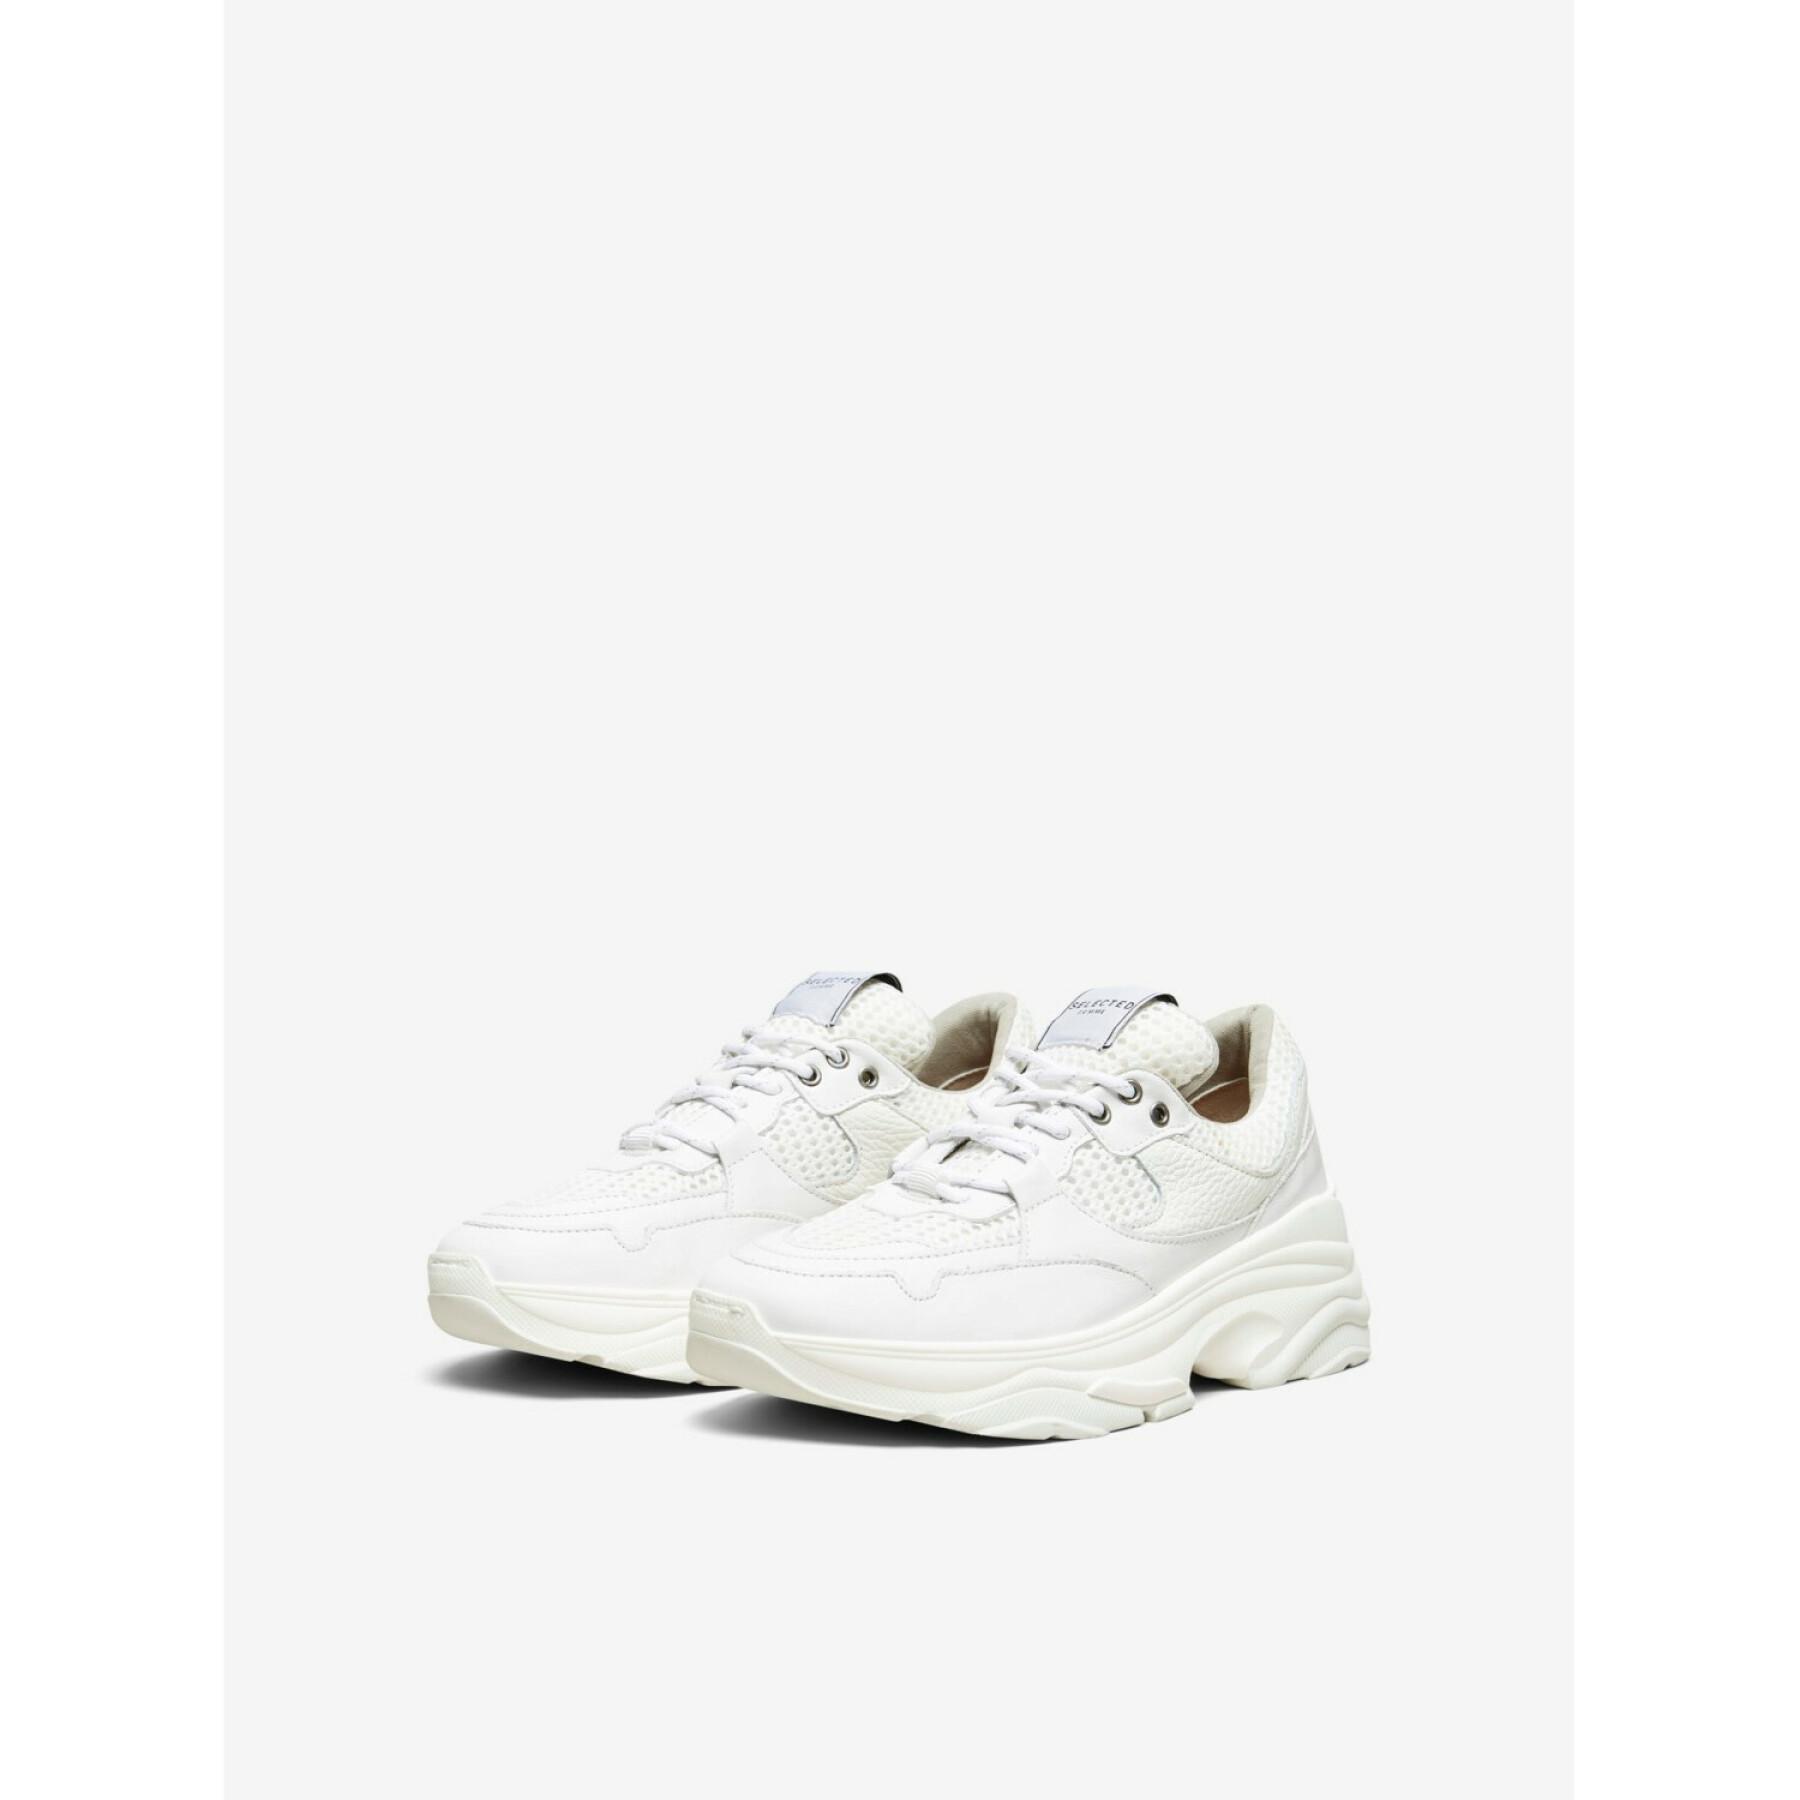 Buty damskie Selected Gavina leather trainer